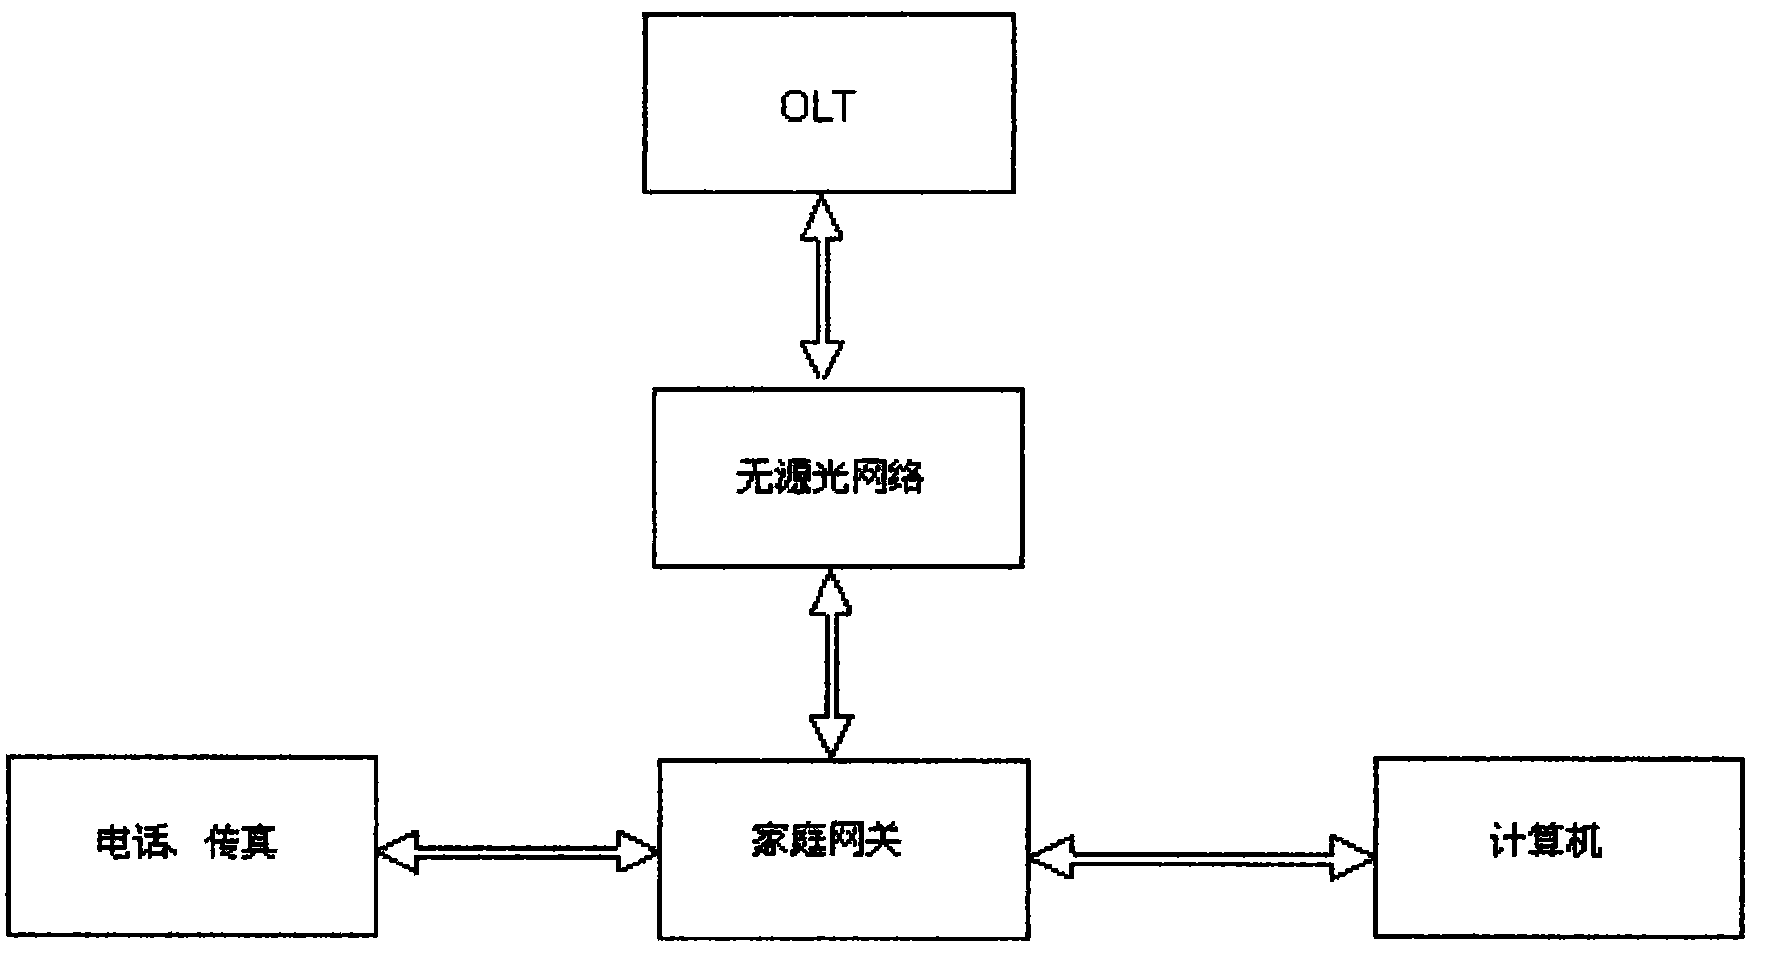 Method for implementing data interchange between optical network terminal and customer terminal using household gateway